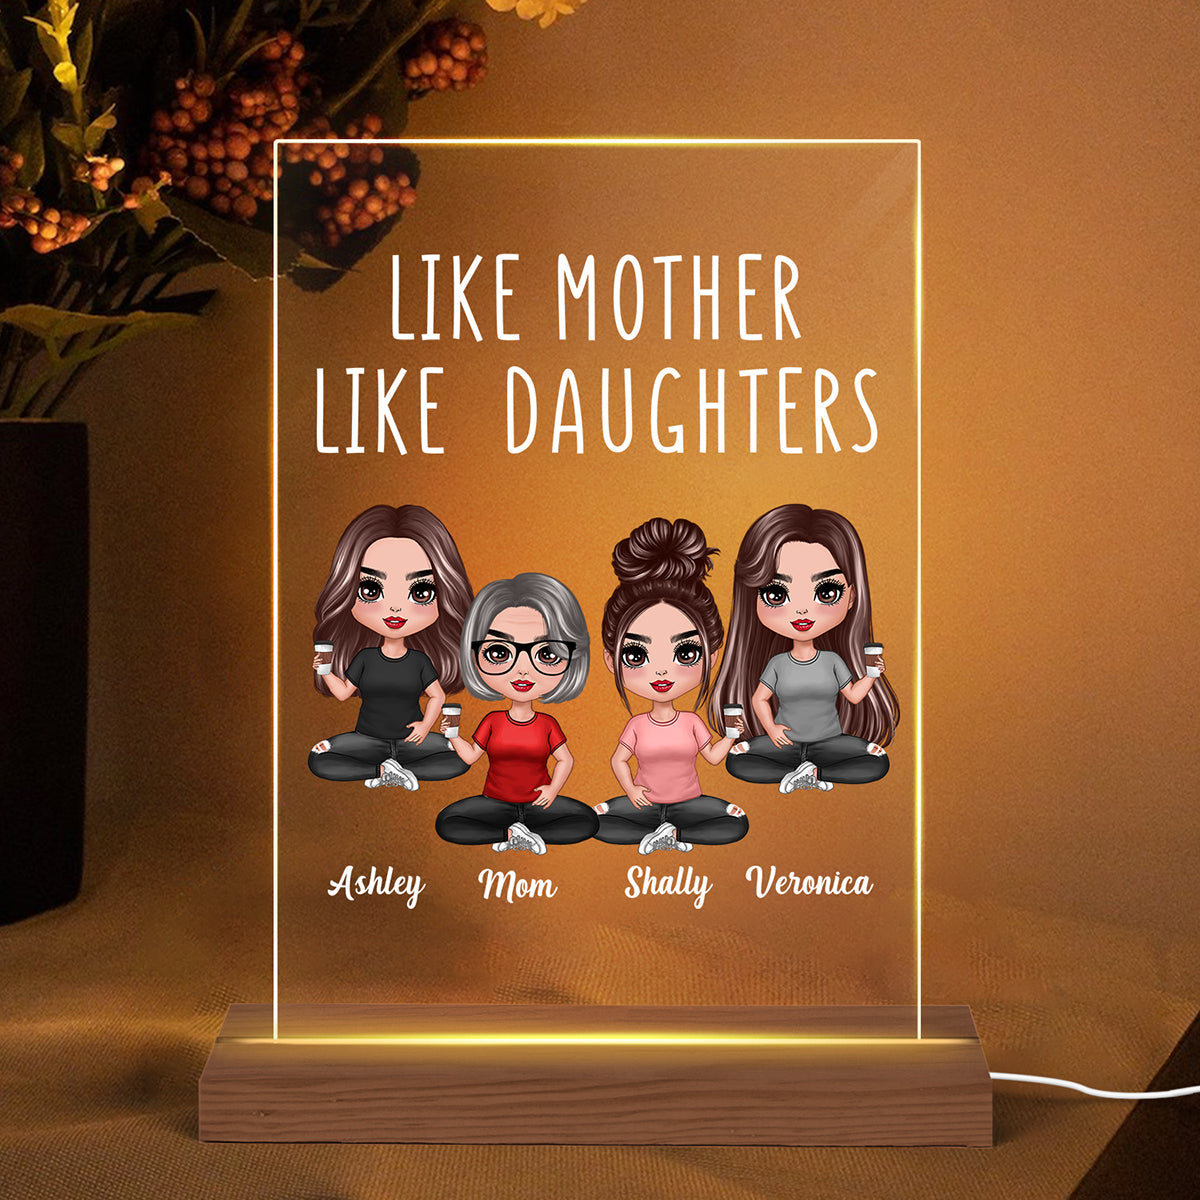 Mom Gifts Night Light, Mothers Day Birthday Gifts from Daughter